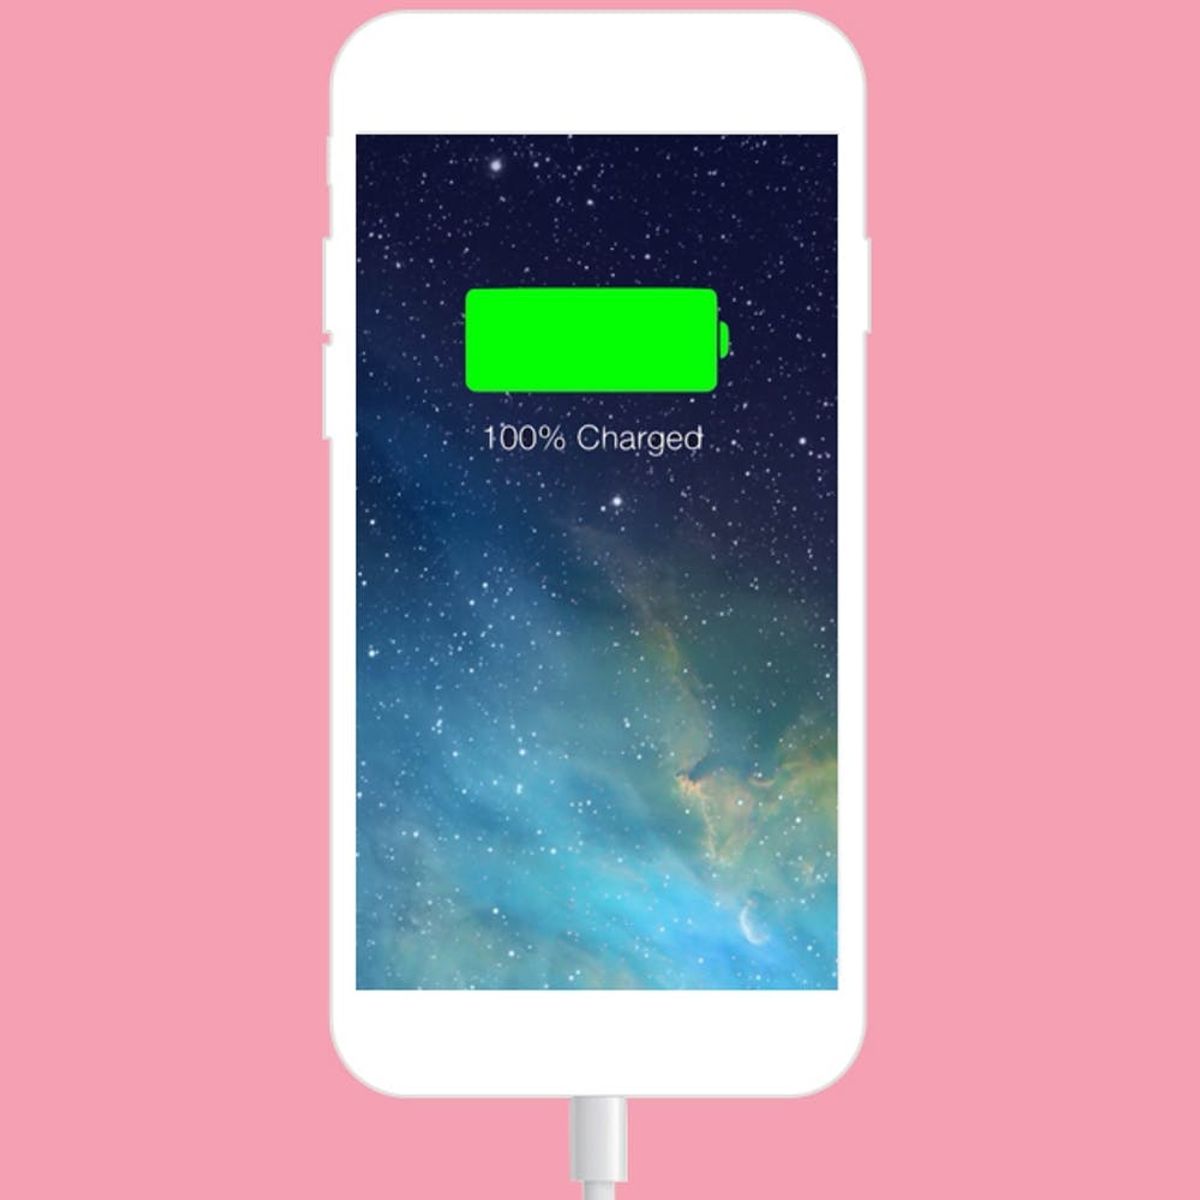 This Is the Super Common Phone-Charging Mistake That Kills Your Battery